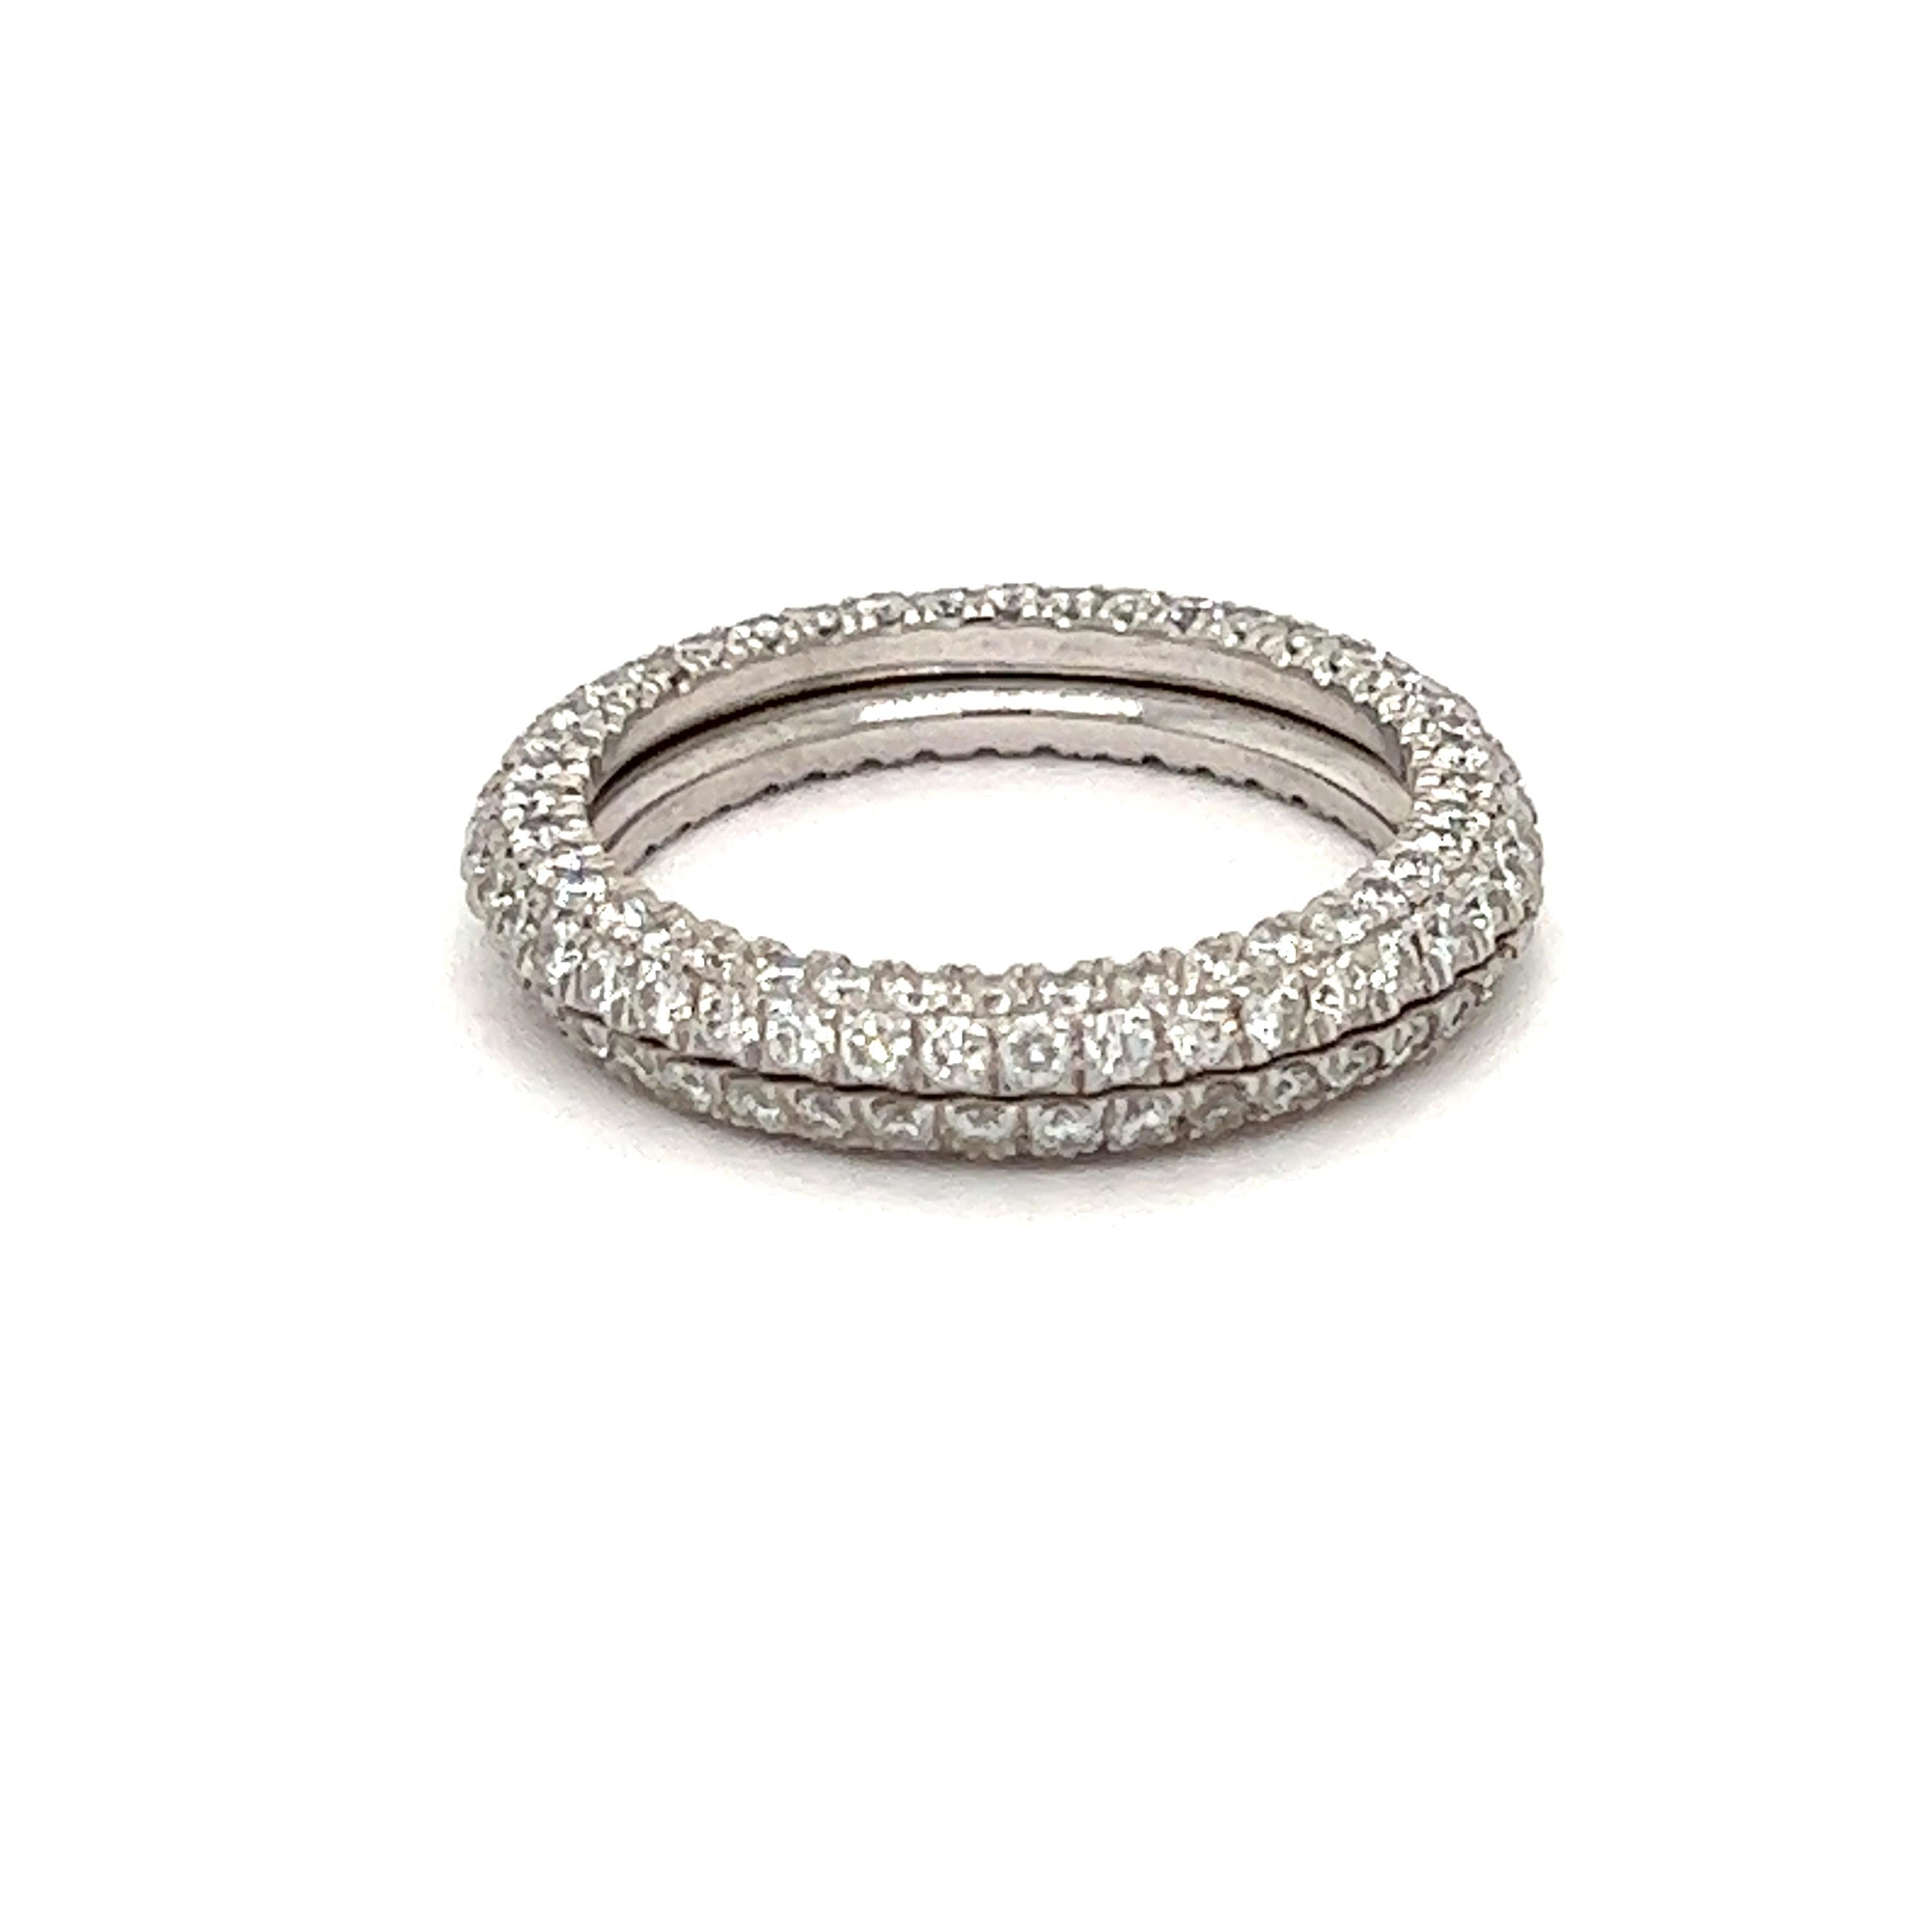 Eternity band set!  Get creative with these pave diamond rings.  Wear them together as stacked rings or with an engagement ring or any other band in the middle.  Inside edges are finished smooth and fit together.  168 round VS-SI clarity and G-H